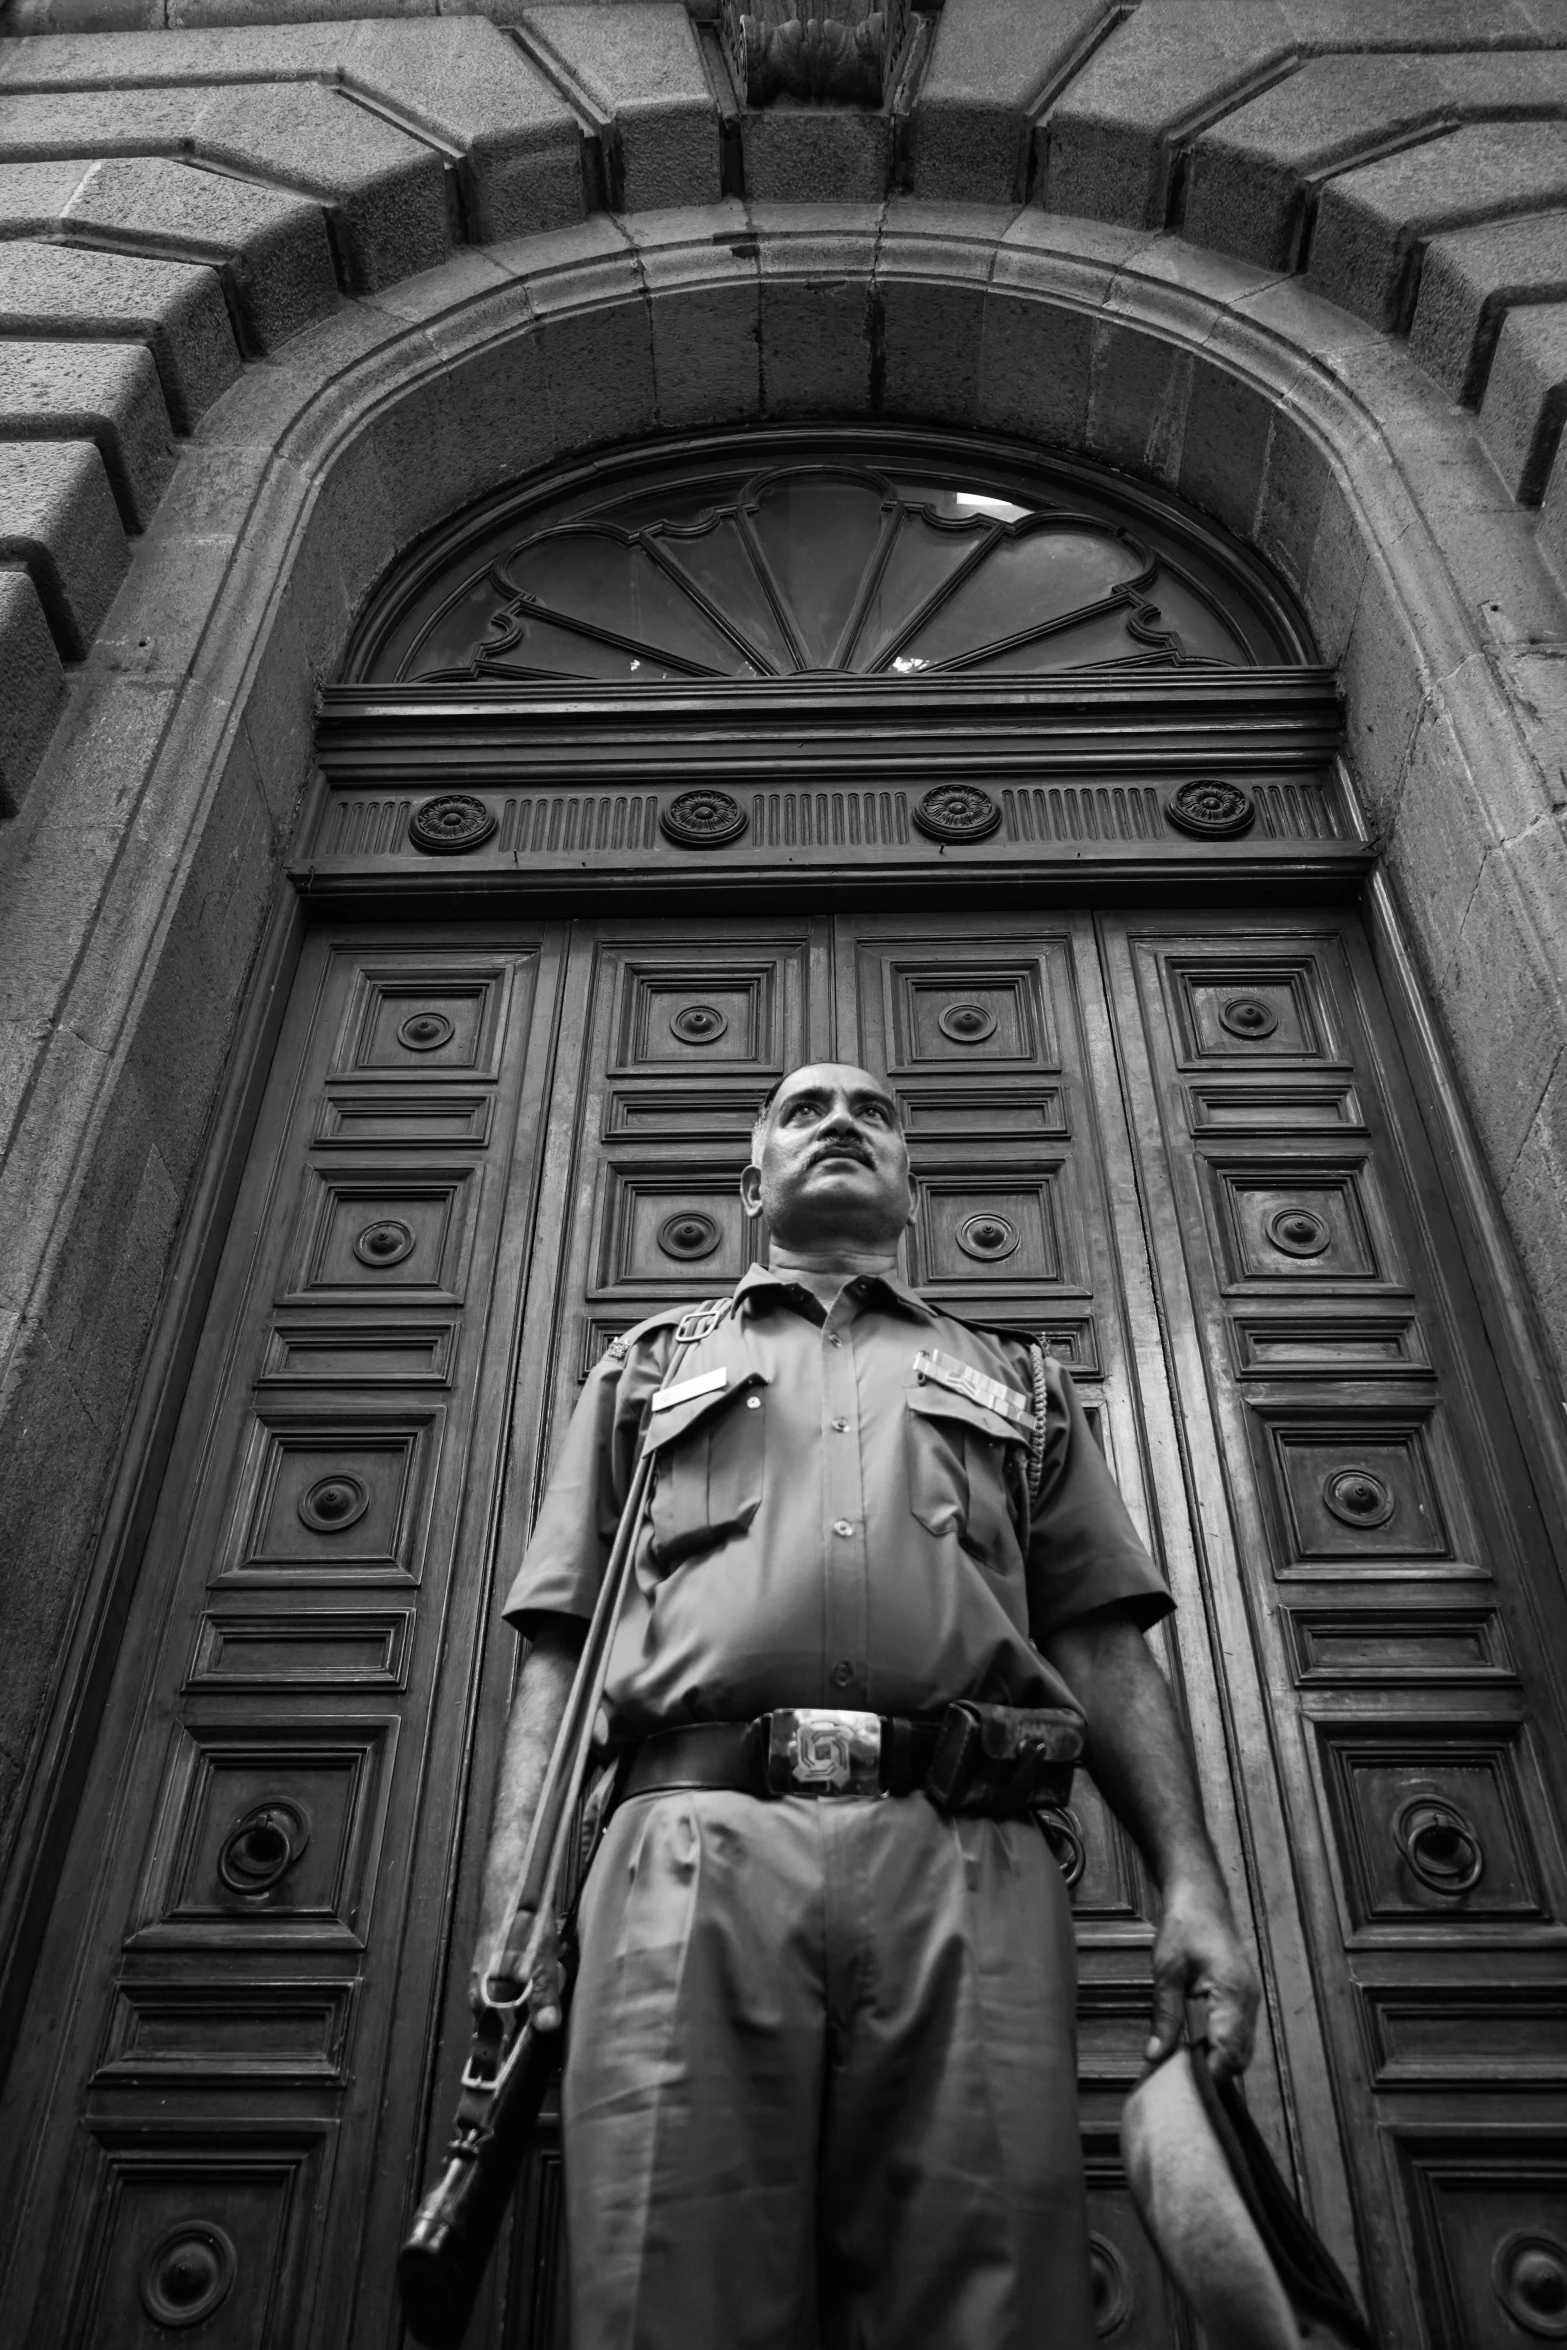 a statue of an officer in uniform stands in front of a doorway